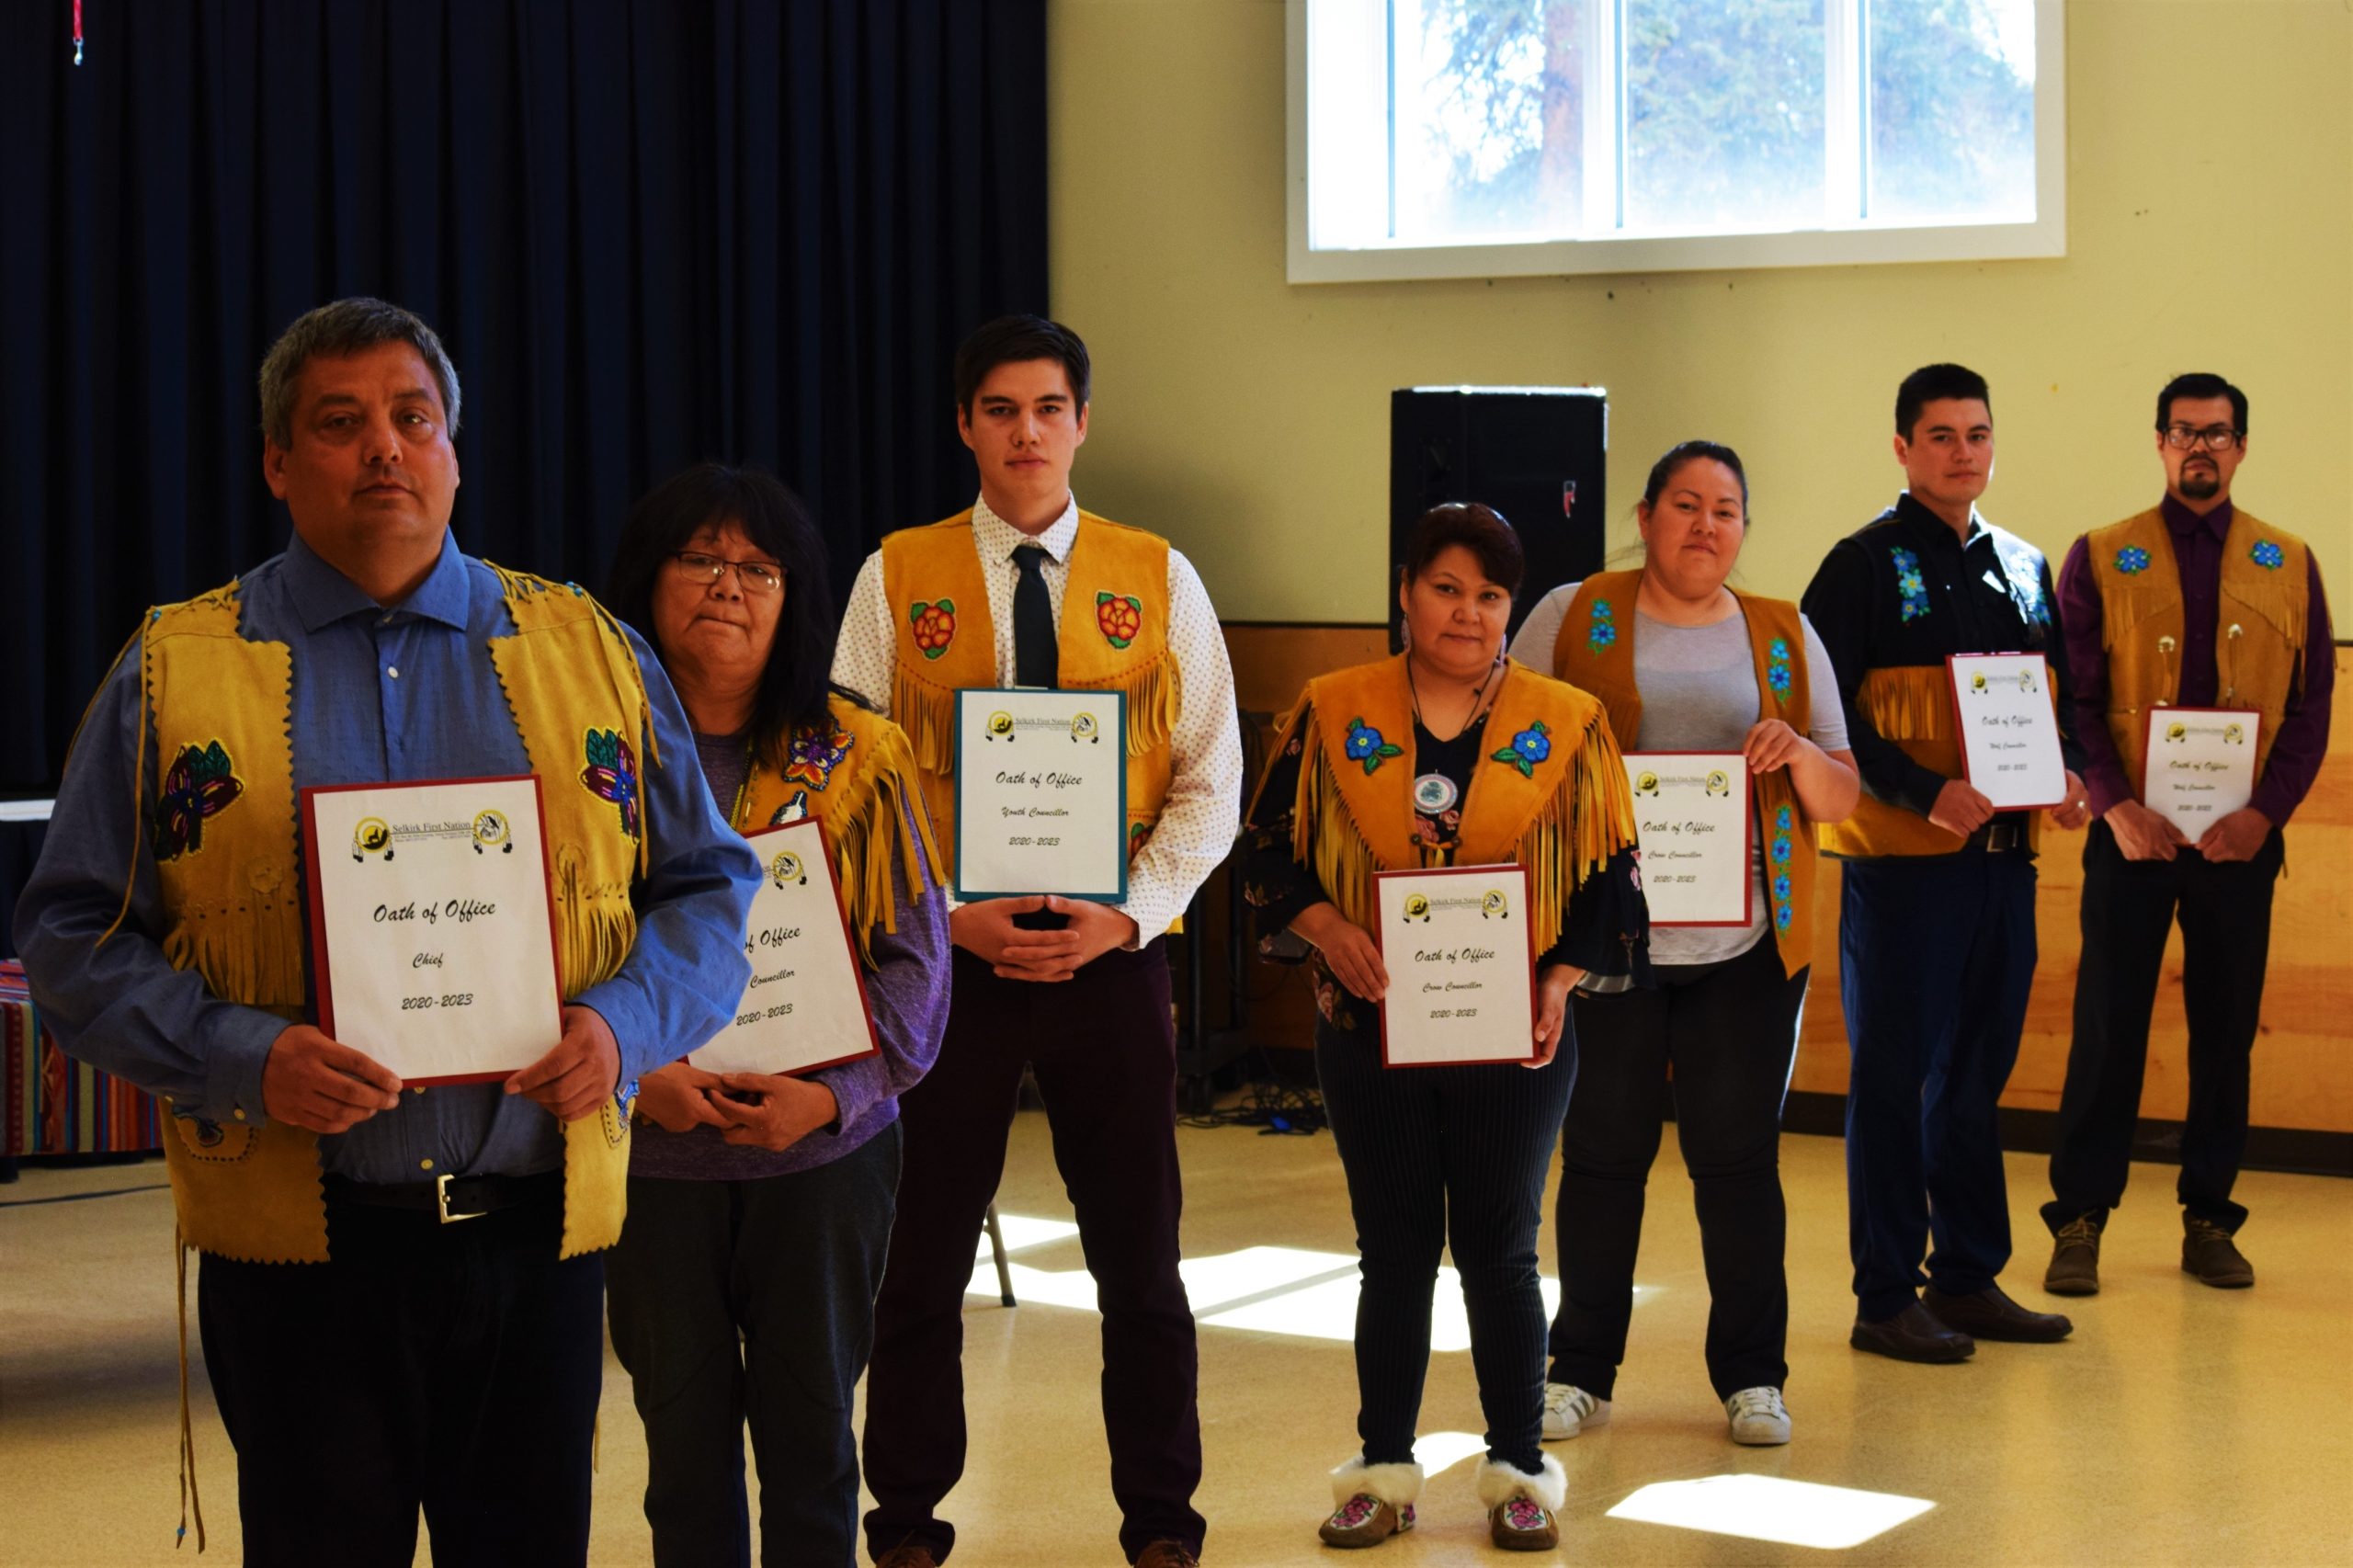 Left to Right: Chief Darin Isaac, Elder Councillor Amy Johnnie, Youth Councillor Cody Sims, Crow Councillor Carmen Baker, Crow Councillor Ashley Edzerza, Wolf Councillor Morris Morrison and Wolf Councillor Jeremy Harper 